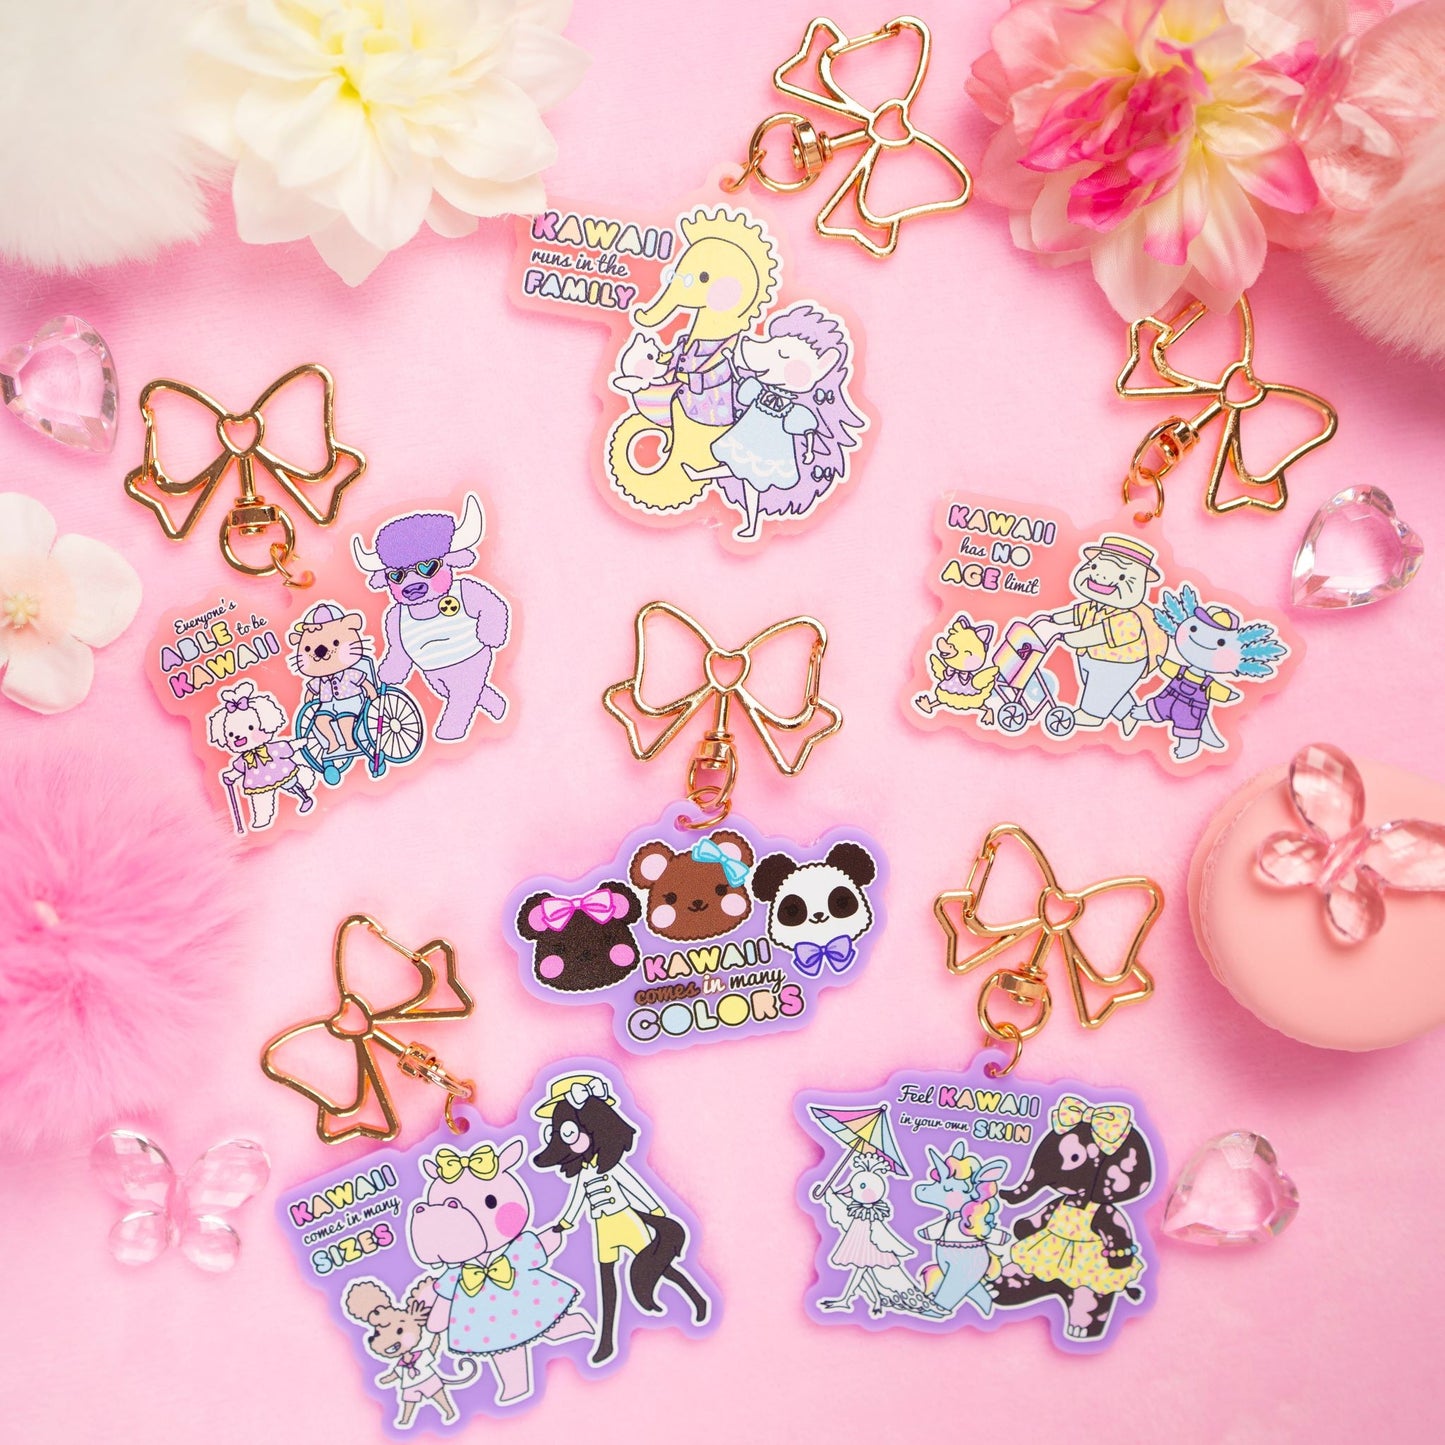 Lucky Pack Rainbow Parade: 6 Keychains